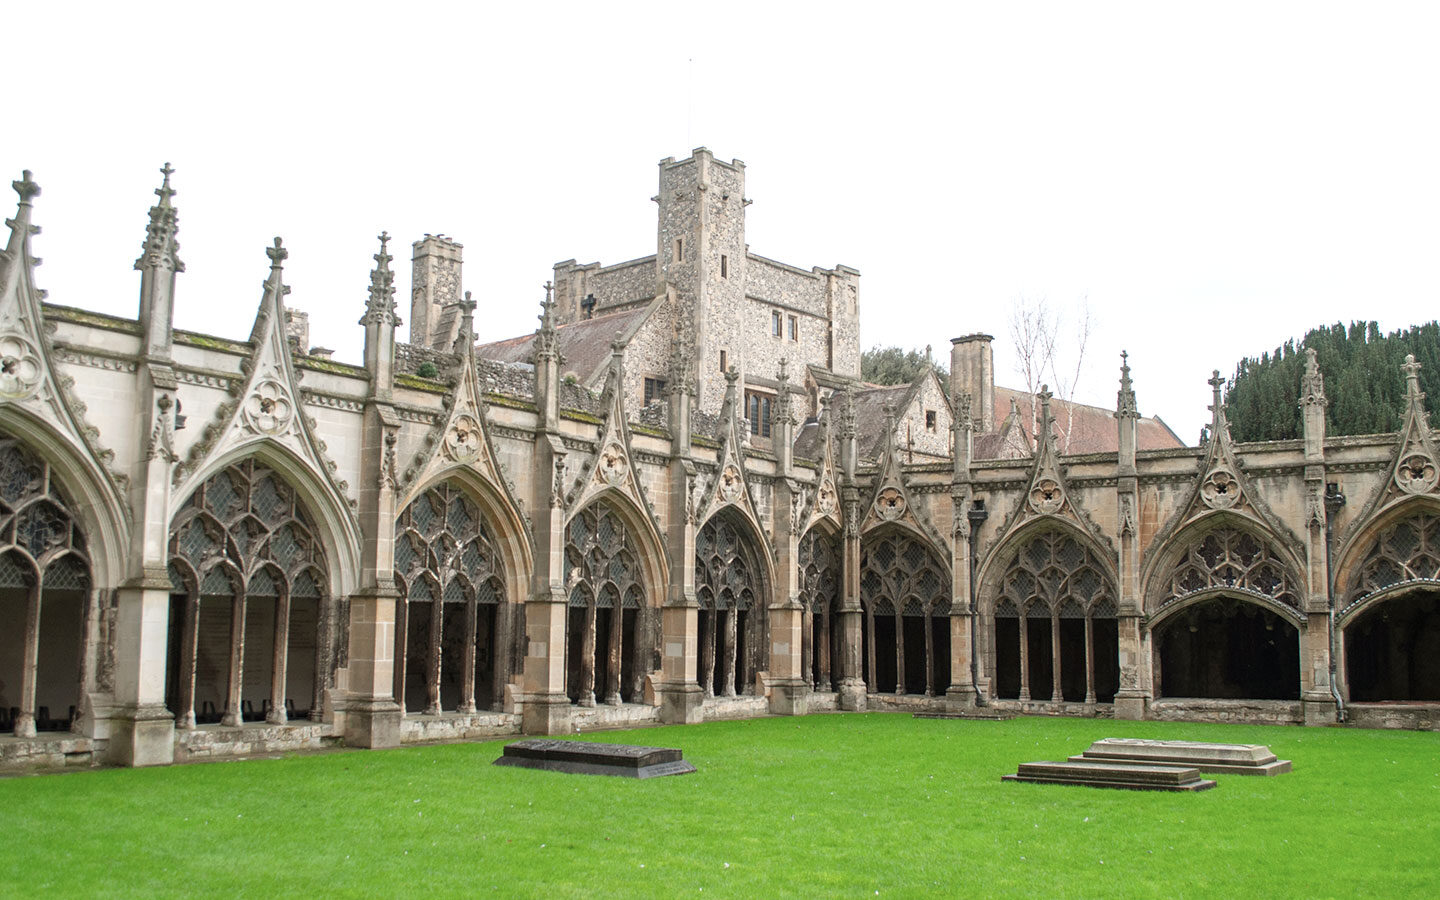 The cloisters at Canterbury Cathedral